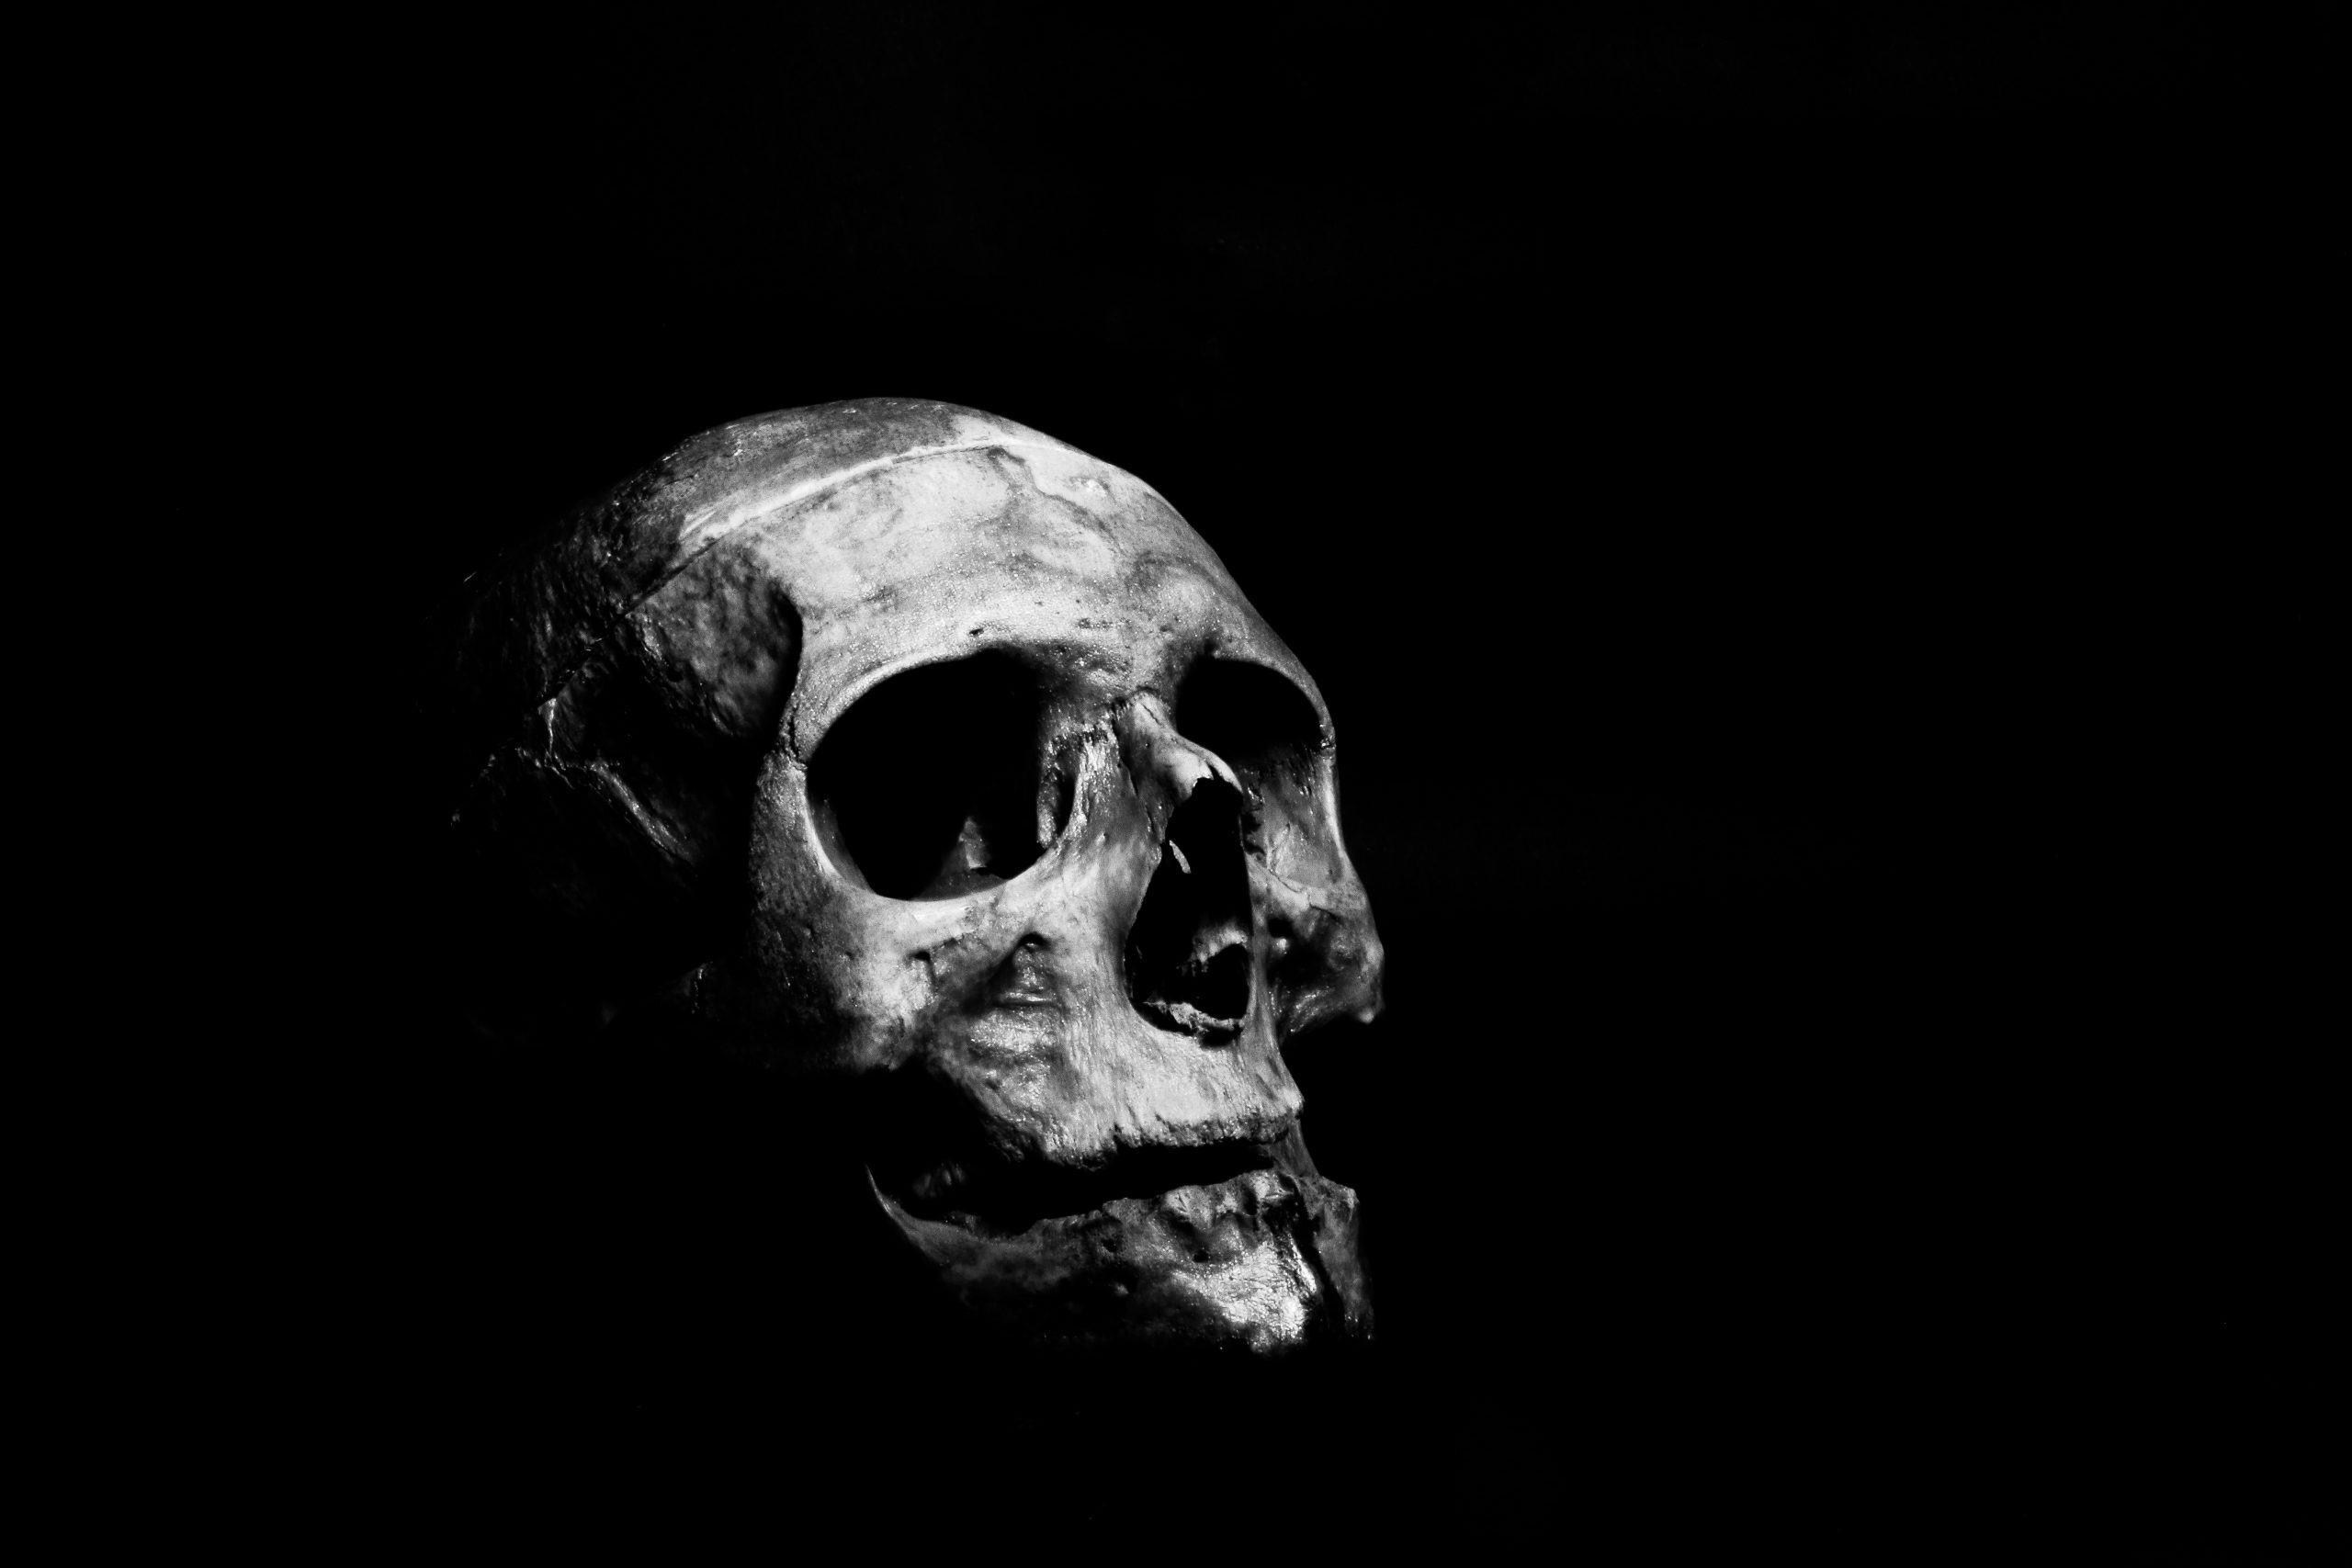 Image of a human skull against black background